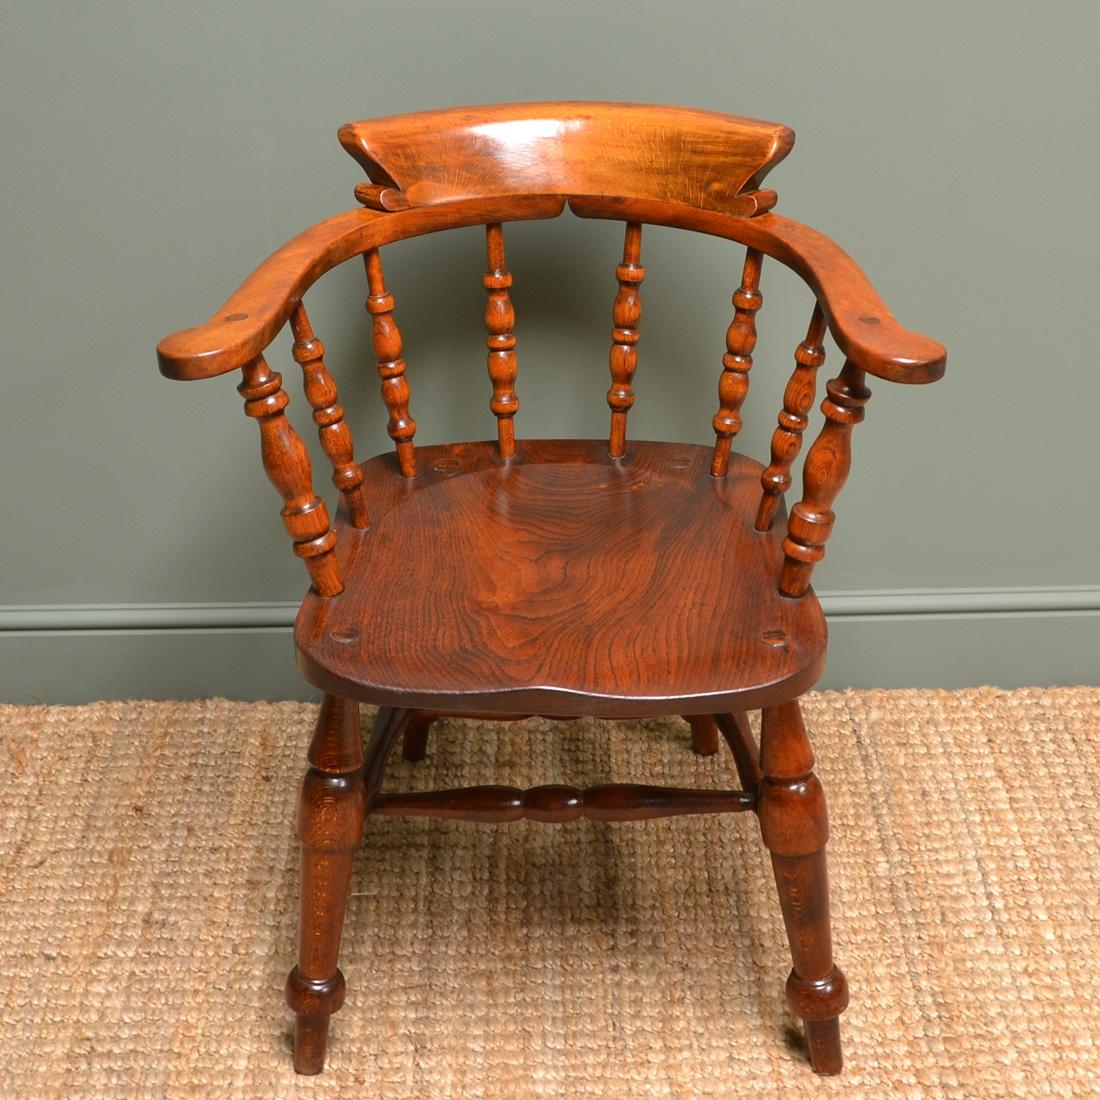 Victorian figured elm smokers bow antique carver chair

This beautiful late 19th Century Victorian Country House Smokers Bow Antique Carver Chair dates from ca. 1900 and is in constructed in a beautifully figured elm and beech. It has a curved